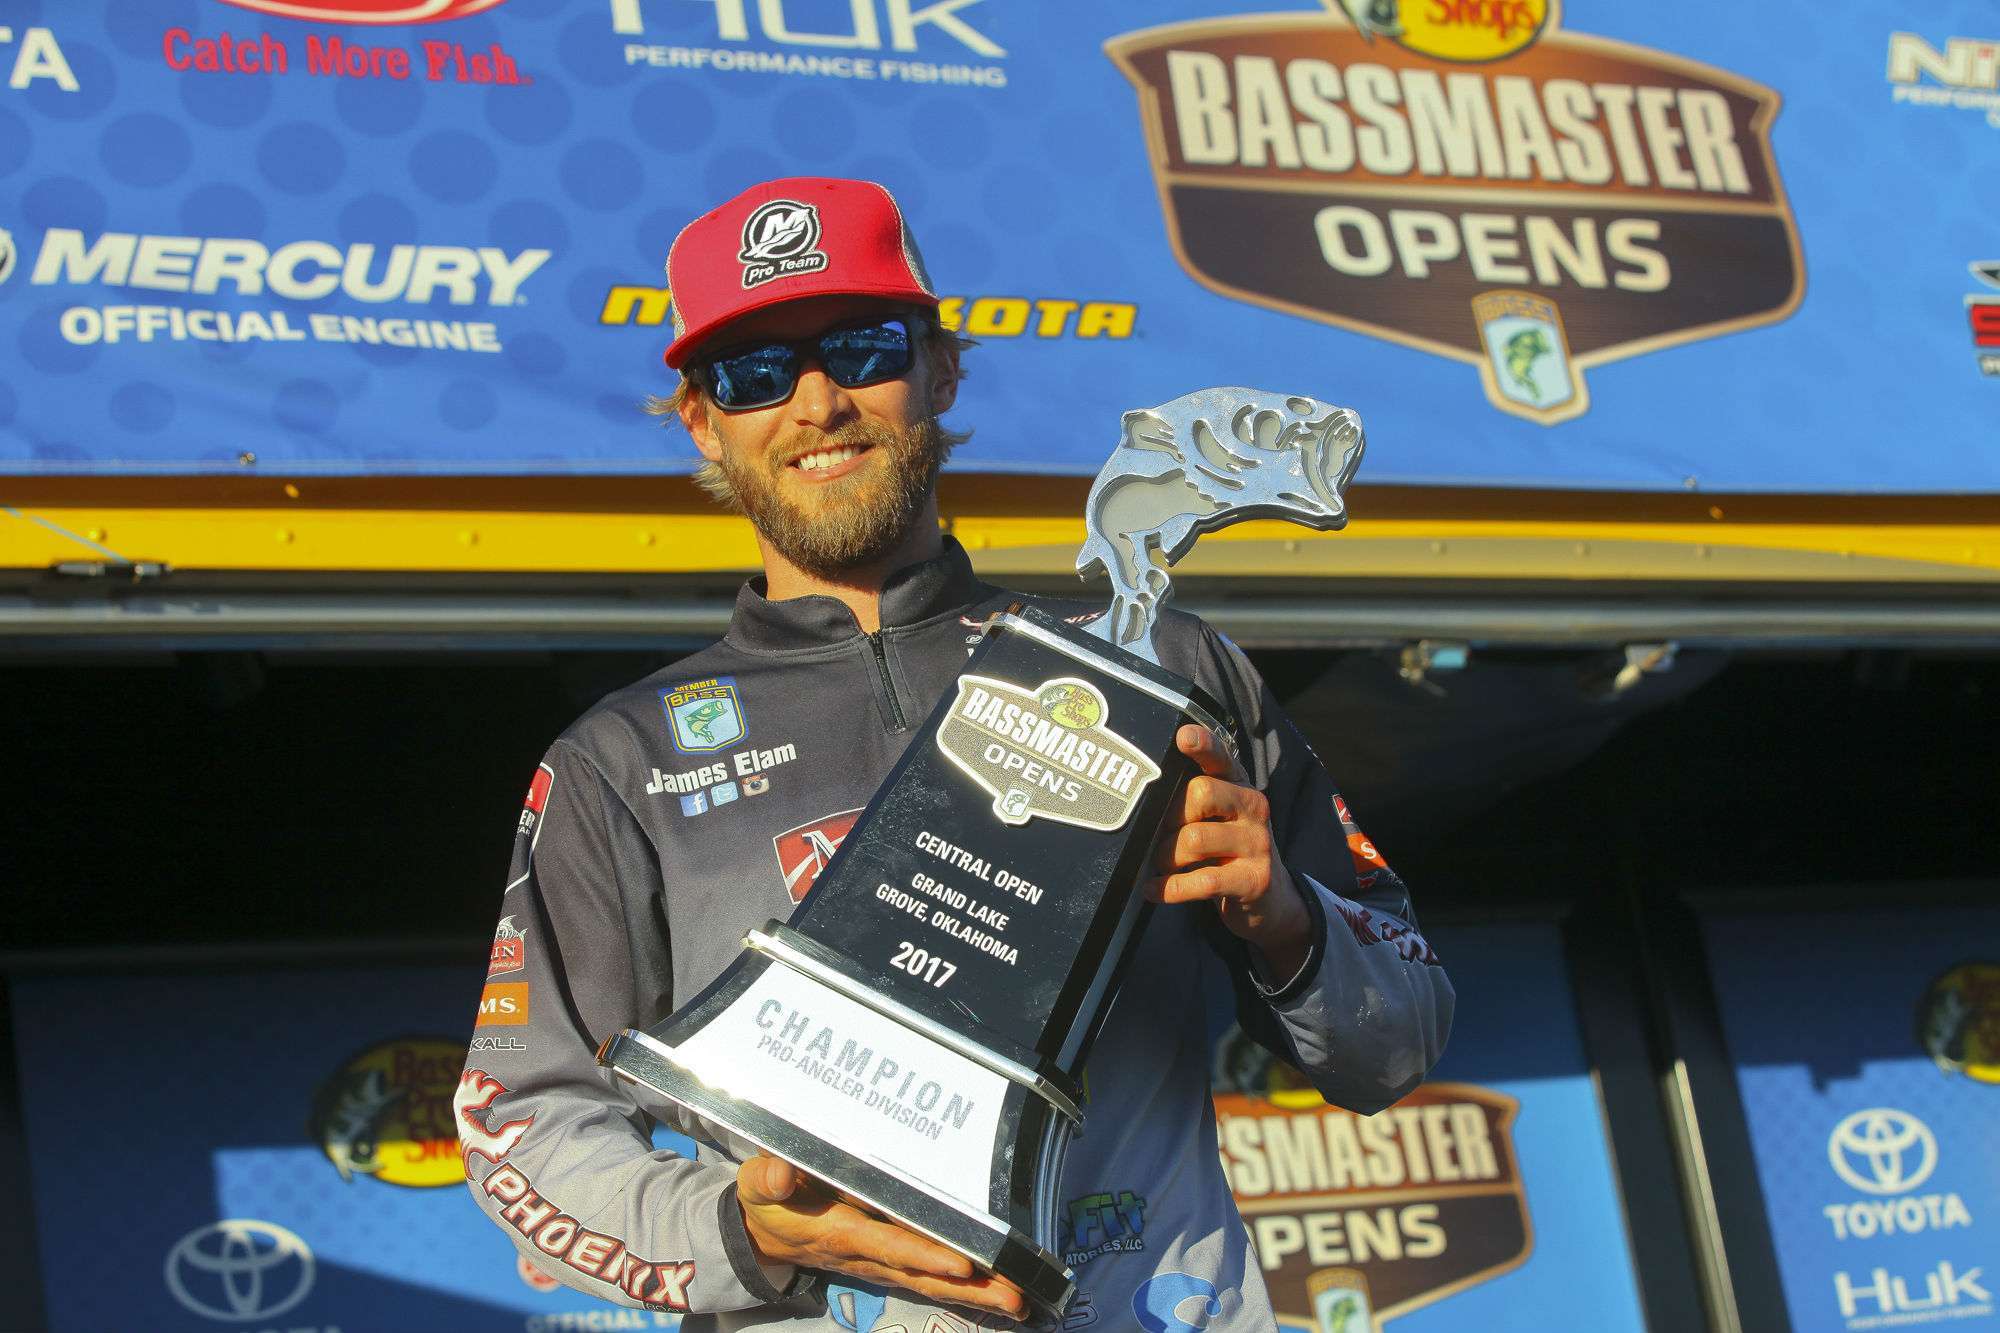 Grand Lake is another popular stop for B.A.S.S. events and has hosted everything up to the Bassmaster Classic. The last time the Bassmaster Opens visited Grand Lake, Oklahoma angler James Elam claimed a fall win with 36 pounds, 14 ounces.
